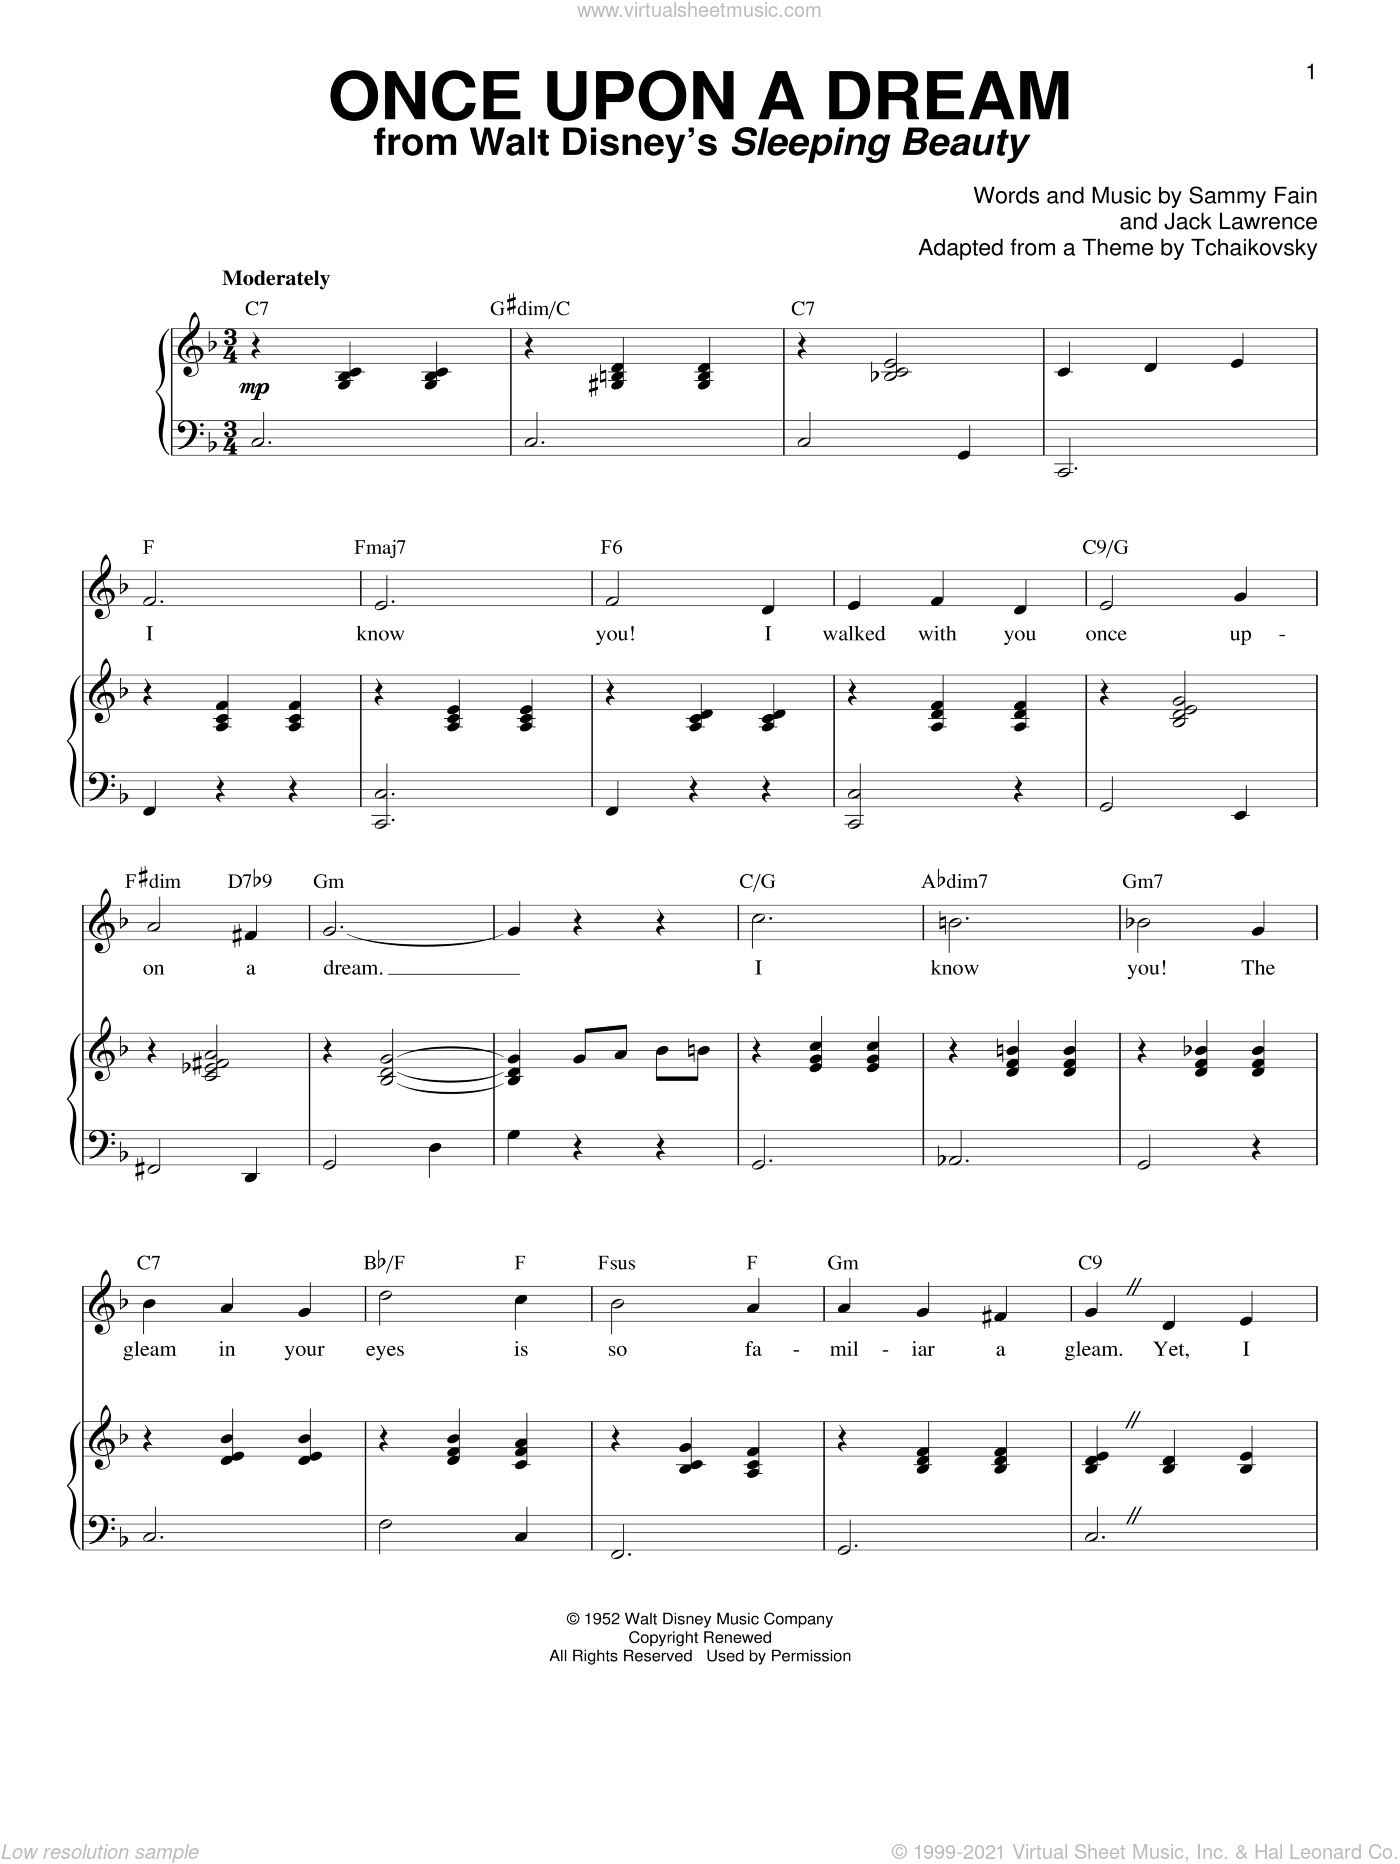 Fain - Once Upon A Dream sheet music for voice and piano v2